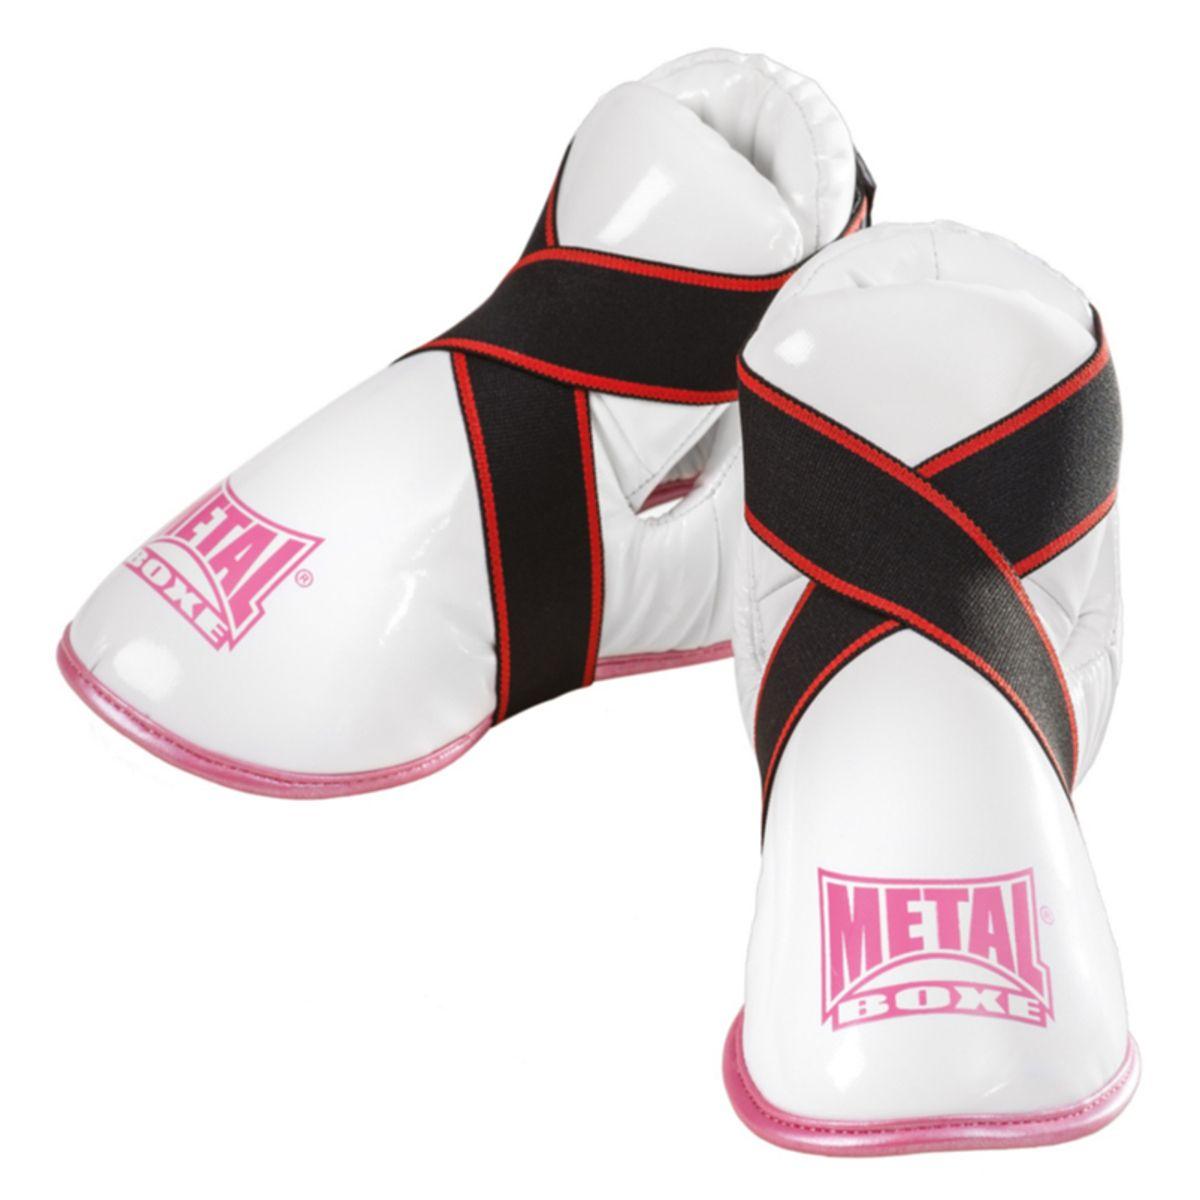 METAL BOXE Metal Boxe MB146 - Coquille Homme white - Private Sport Shop